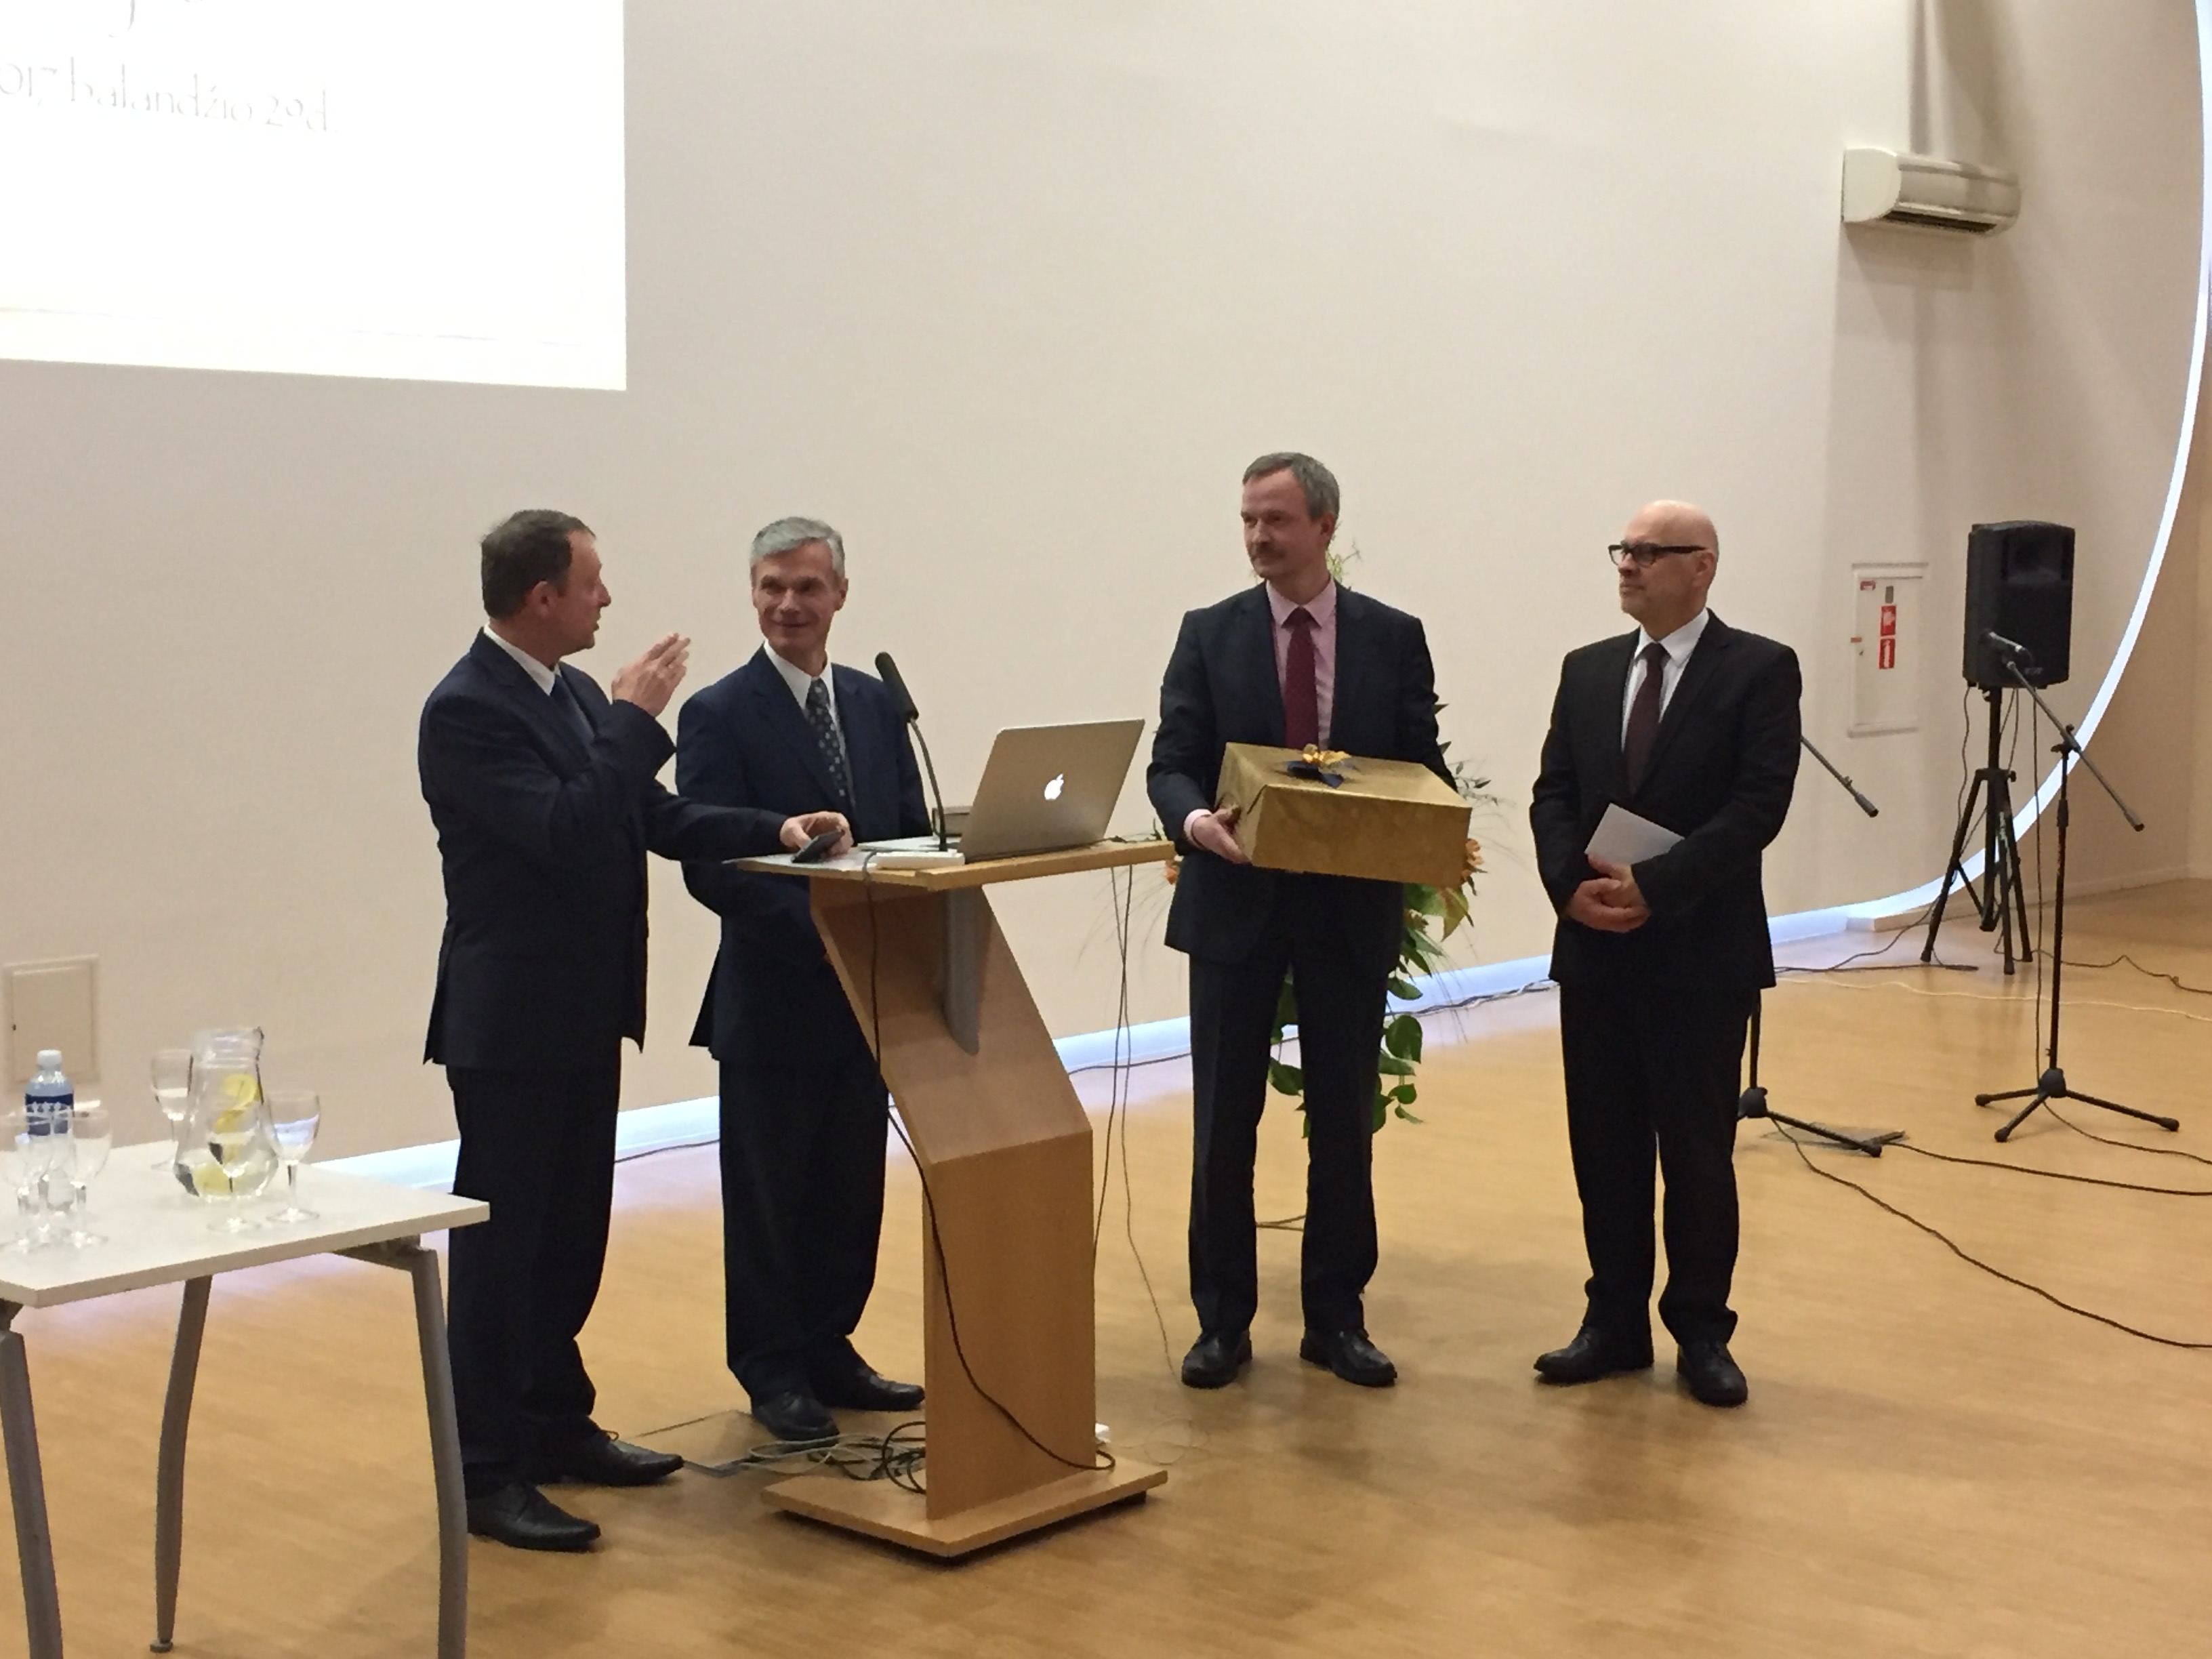 David Nõmmik (left) presents a gift on behalf of the Baltic Union and Estonian and Latvian Conferences